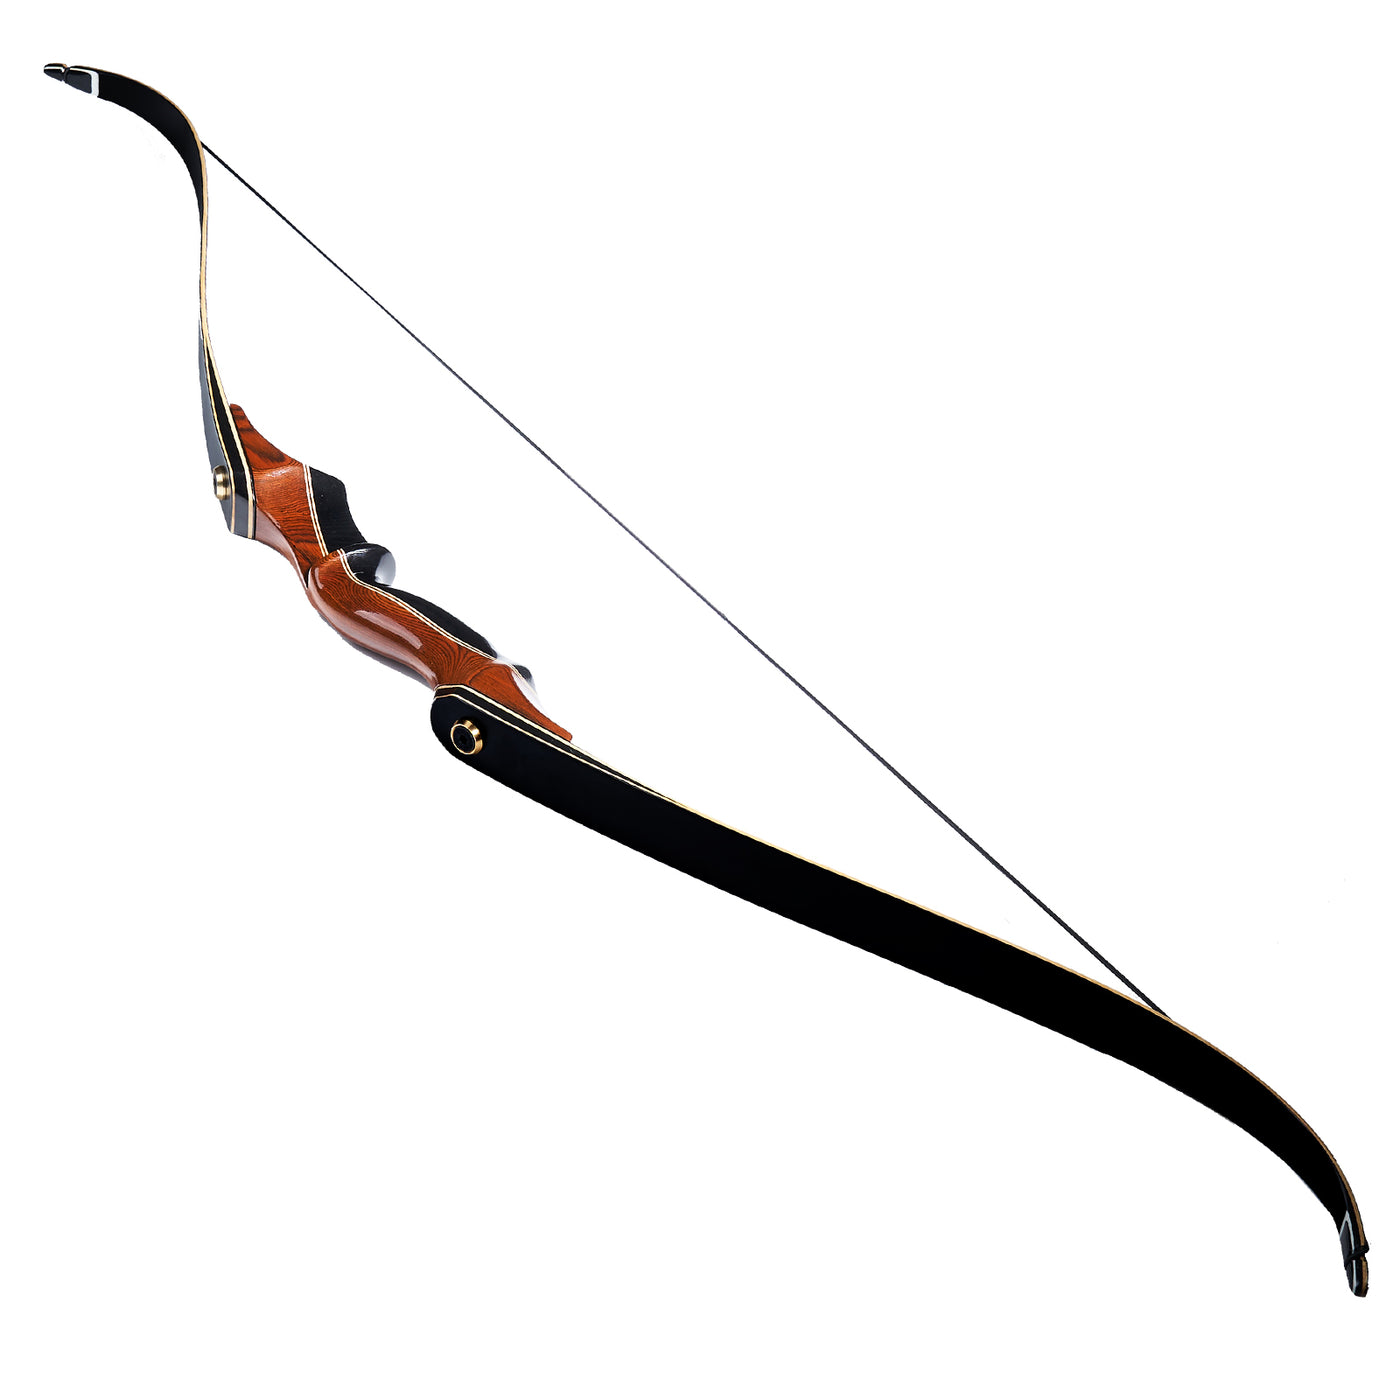 58" Laminated Takedown Archery Bow Red/Black Riser 35/40/45/50/55lbs Stringer Armguard Finter Tab Arrow Rest String Silencer for Target Hunting